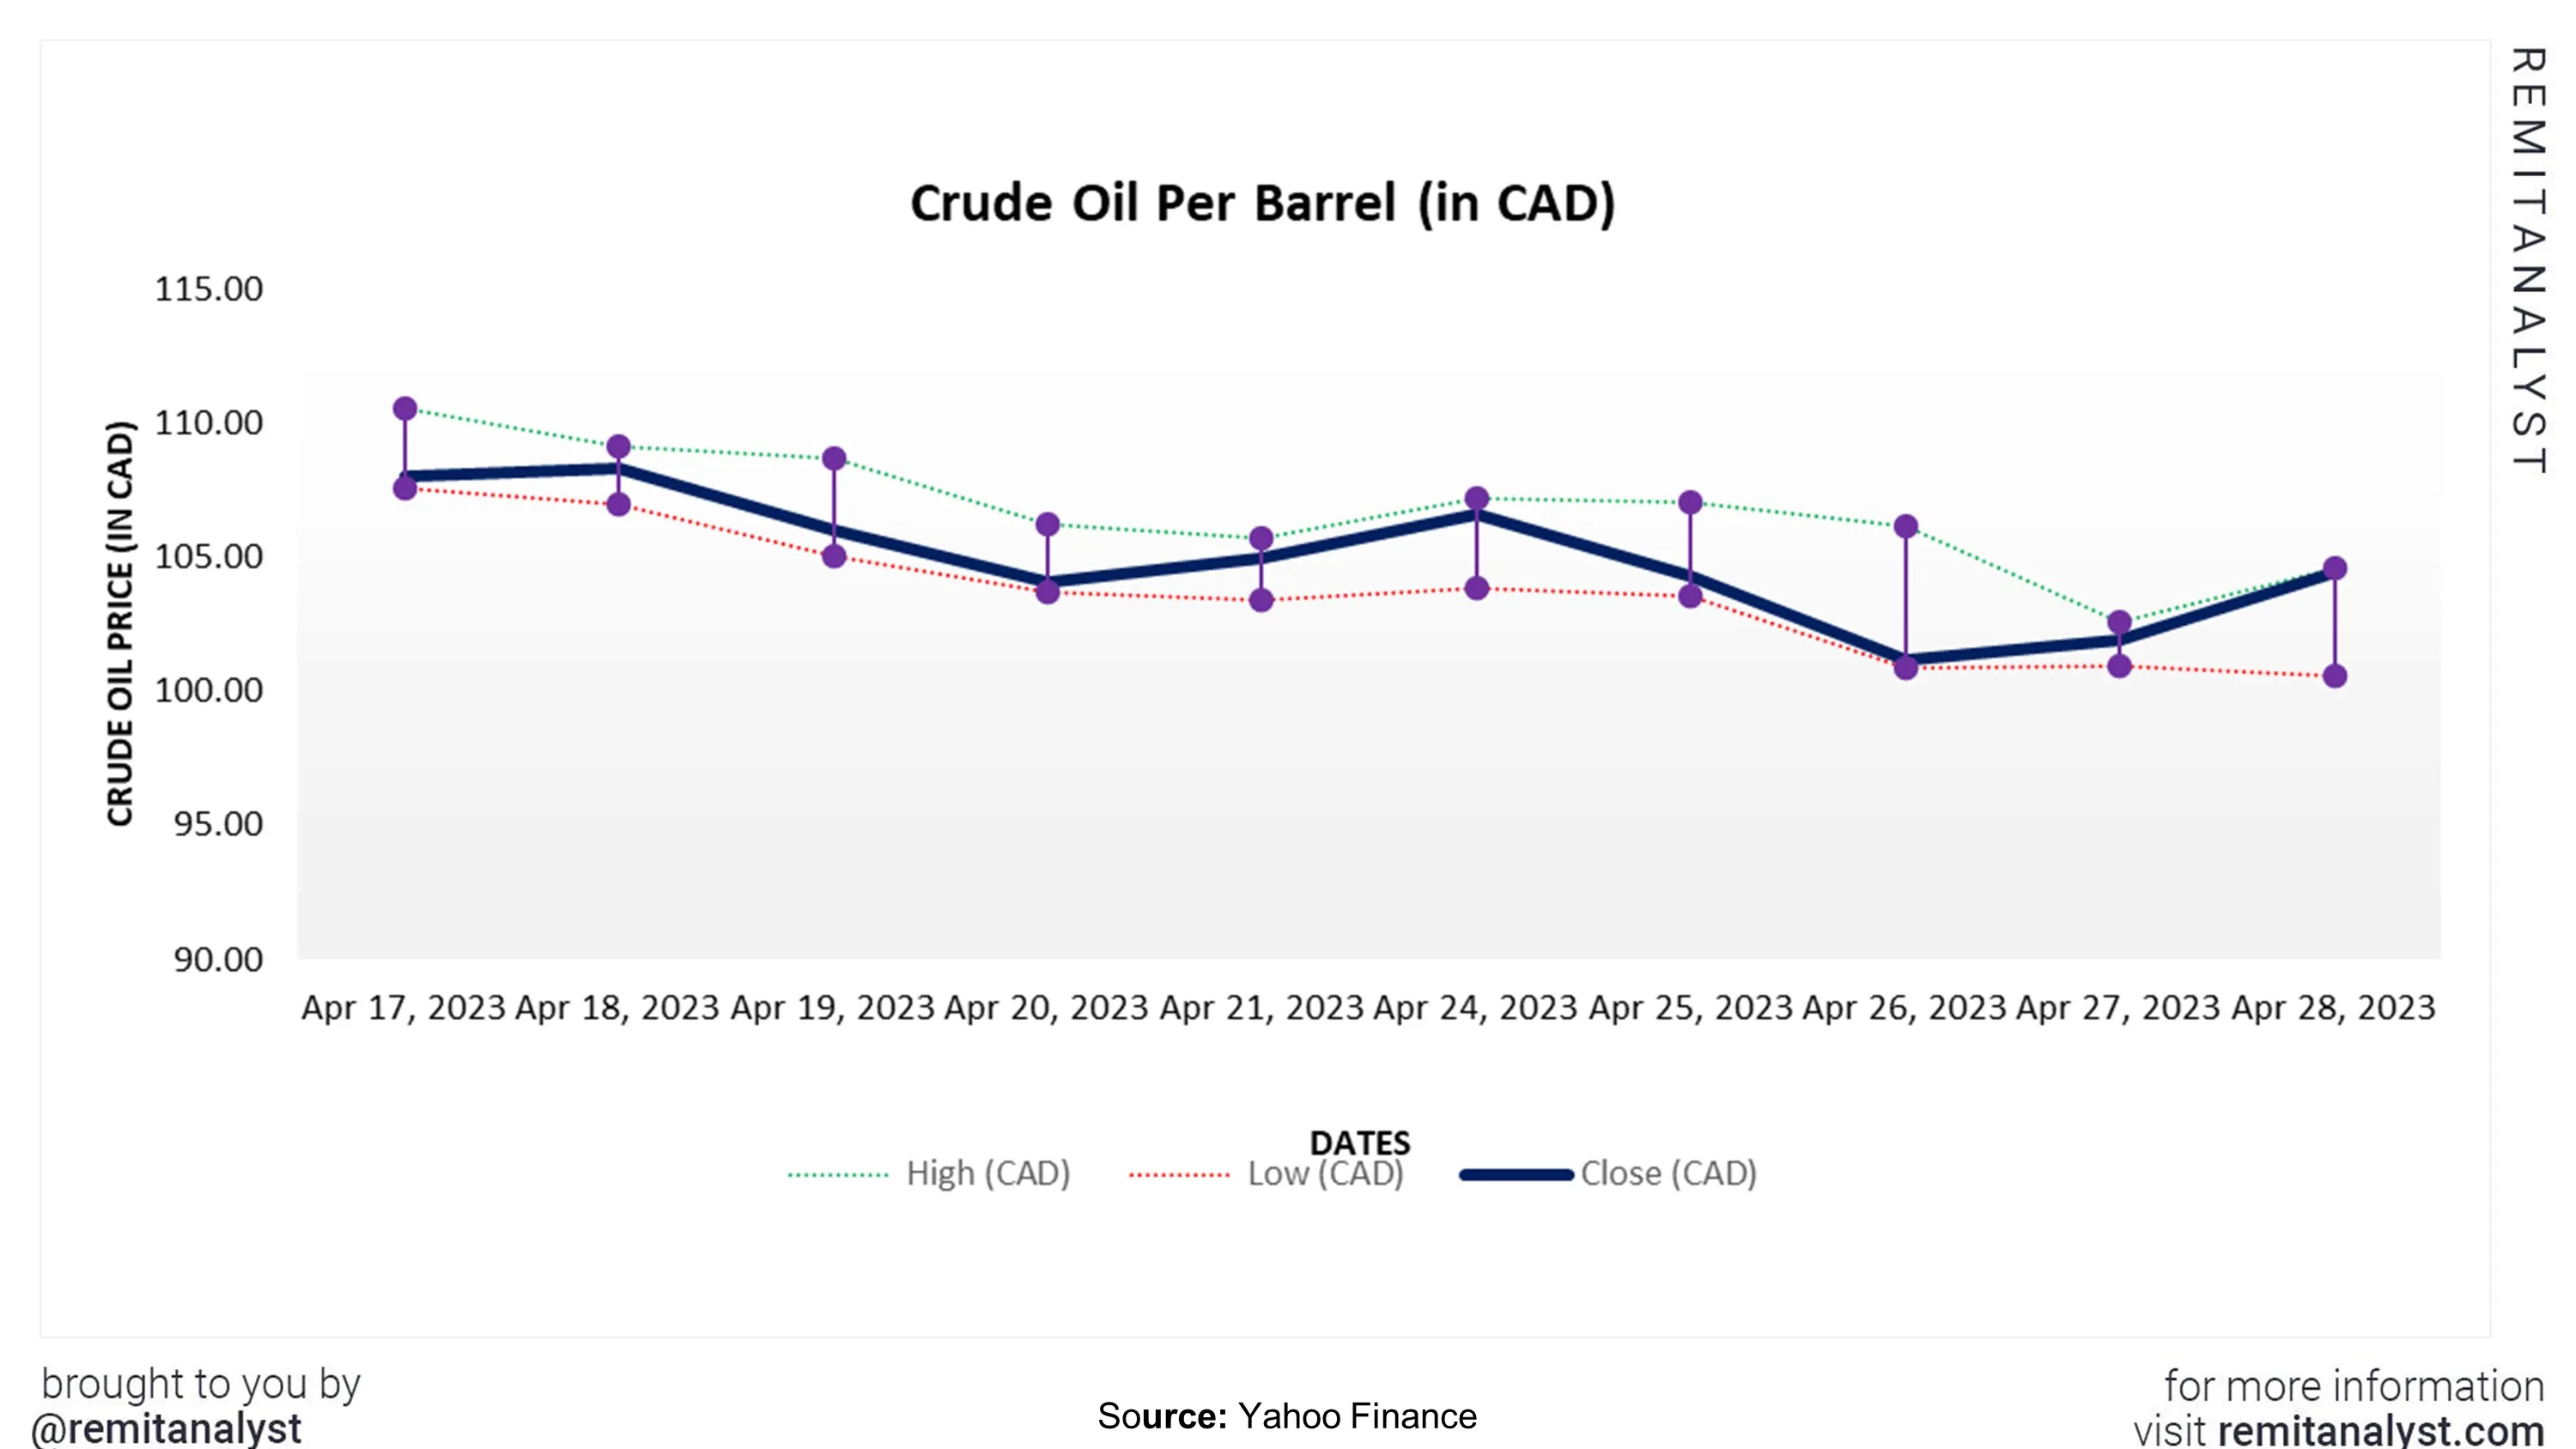 crude-oil-prices-canada-from-17-apr-2023-to-28-apr-2023